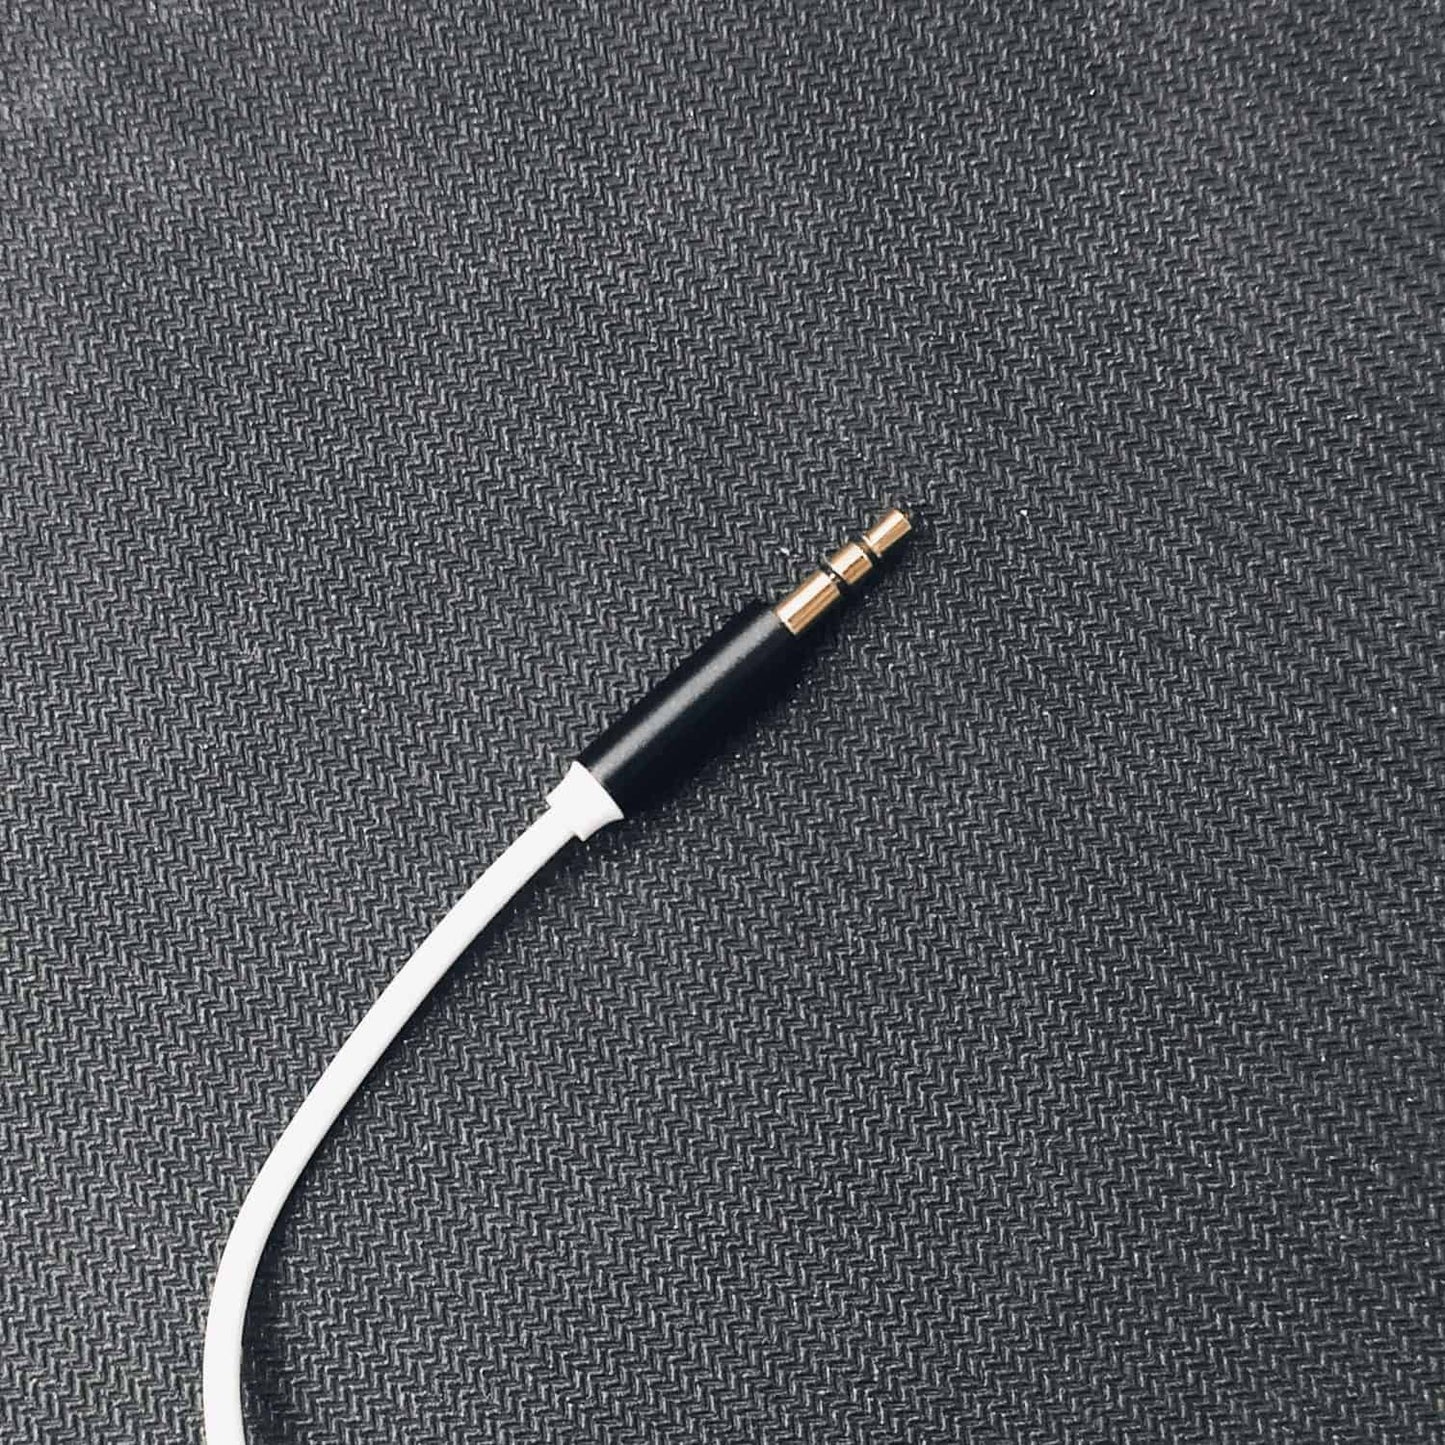 Audio Cable - 1m, male connectors: 1× lightning, 1× jack 3.5 mm gold and black